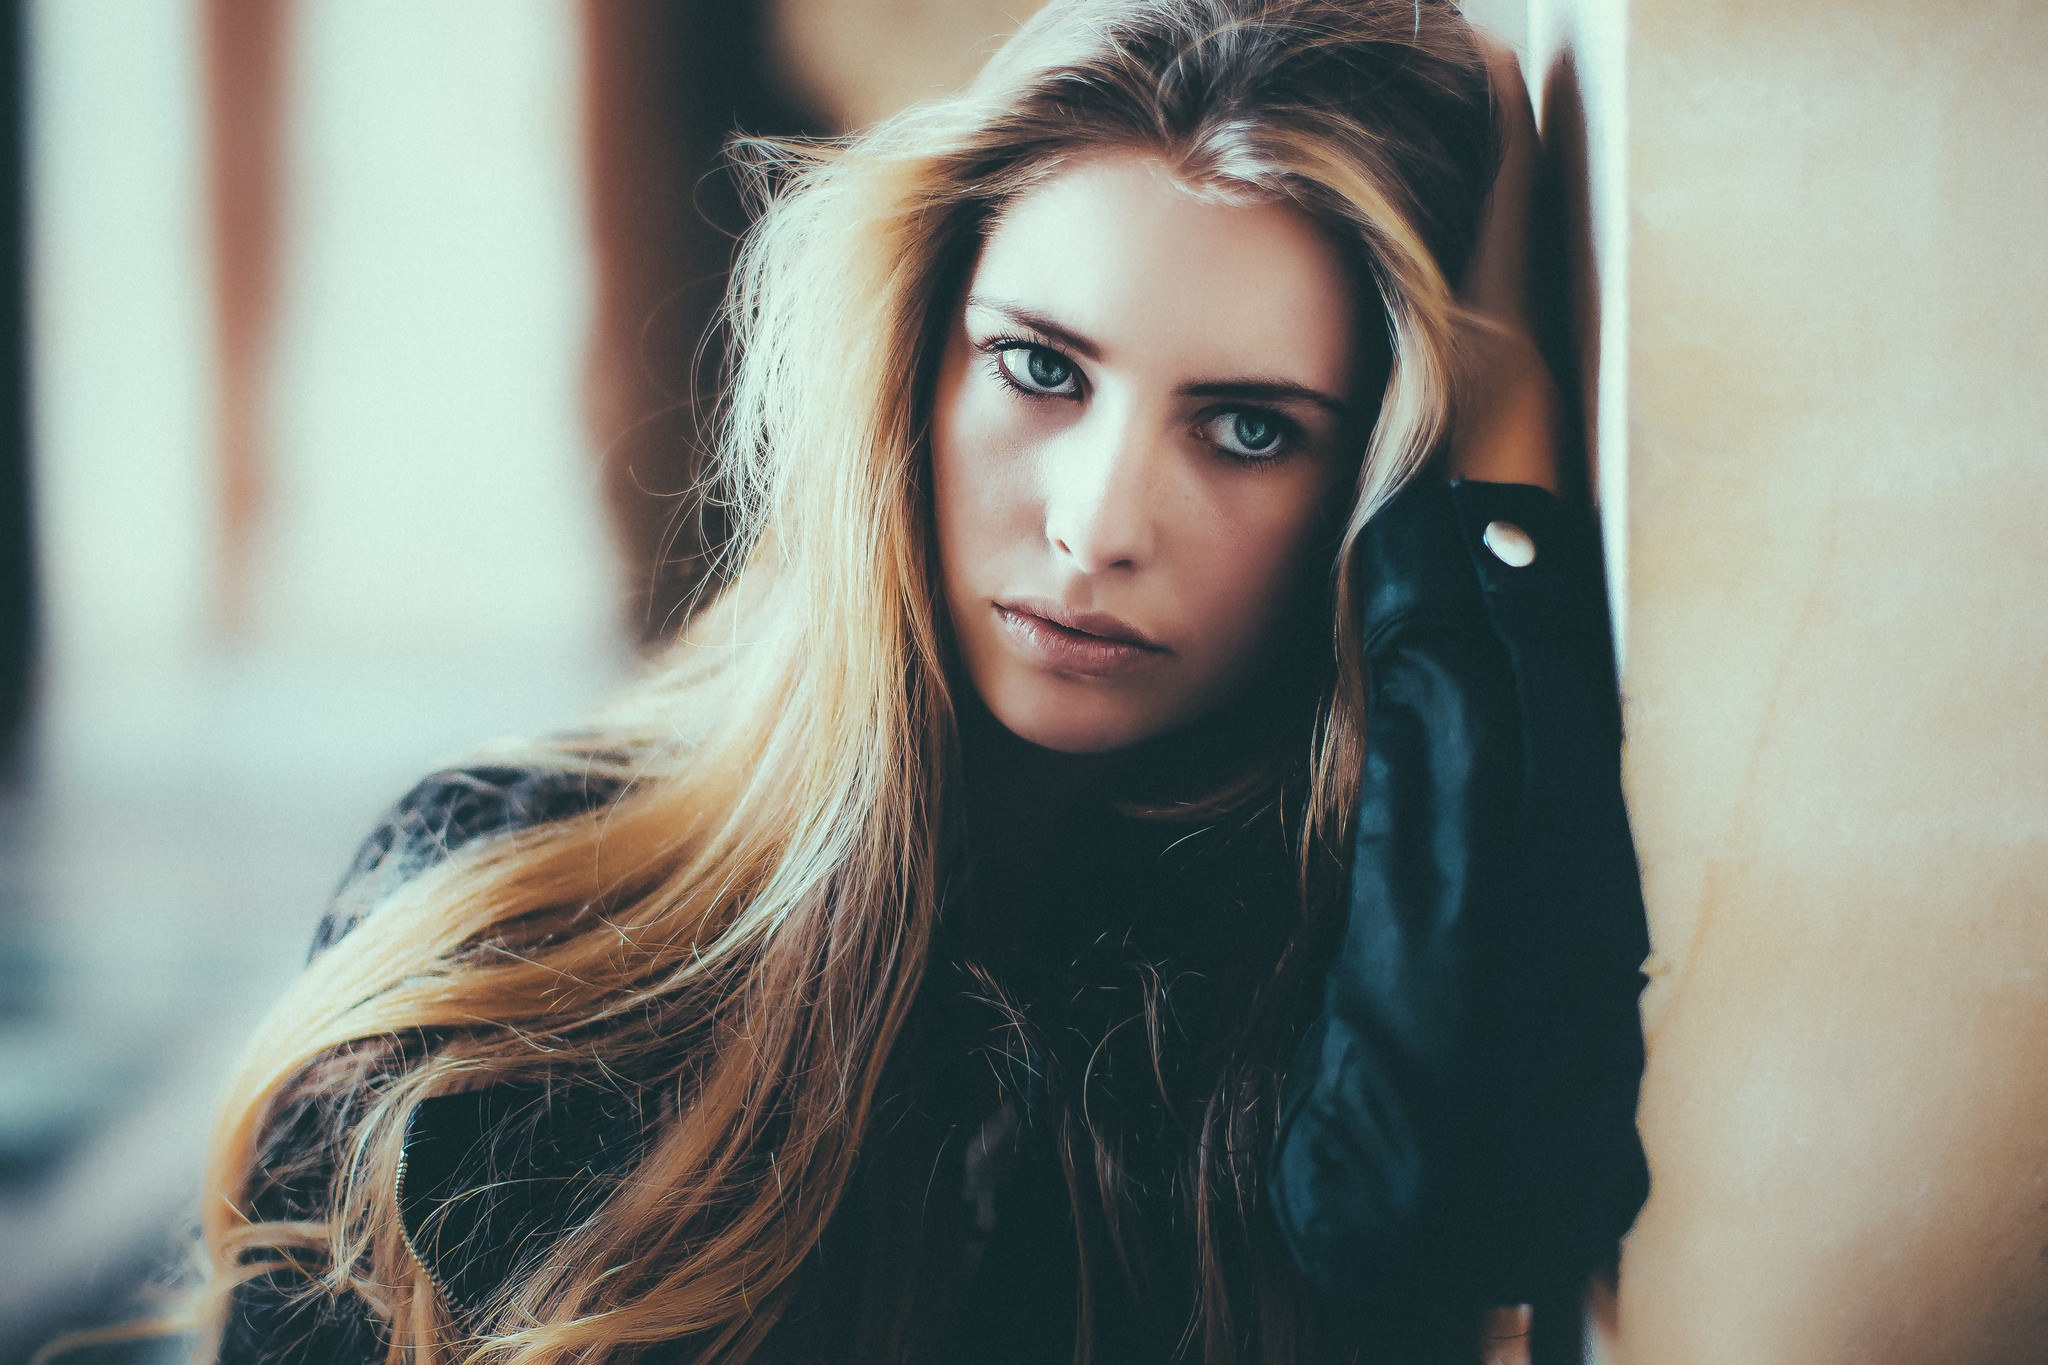 People 2048x1365 women face portrait blonde looking away hands on head David Olkarny Camille Rochette leather jacket long hair black jackets jacket makeup dyed hair young women closeup